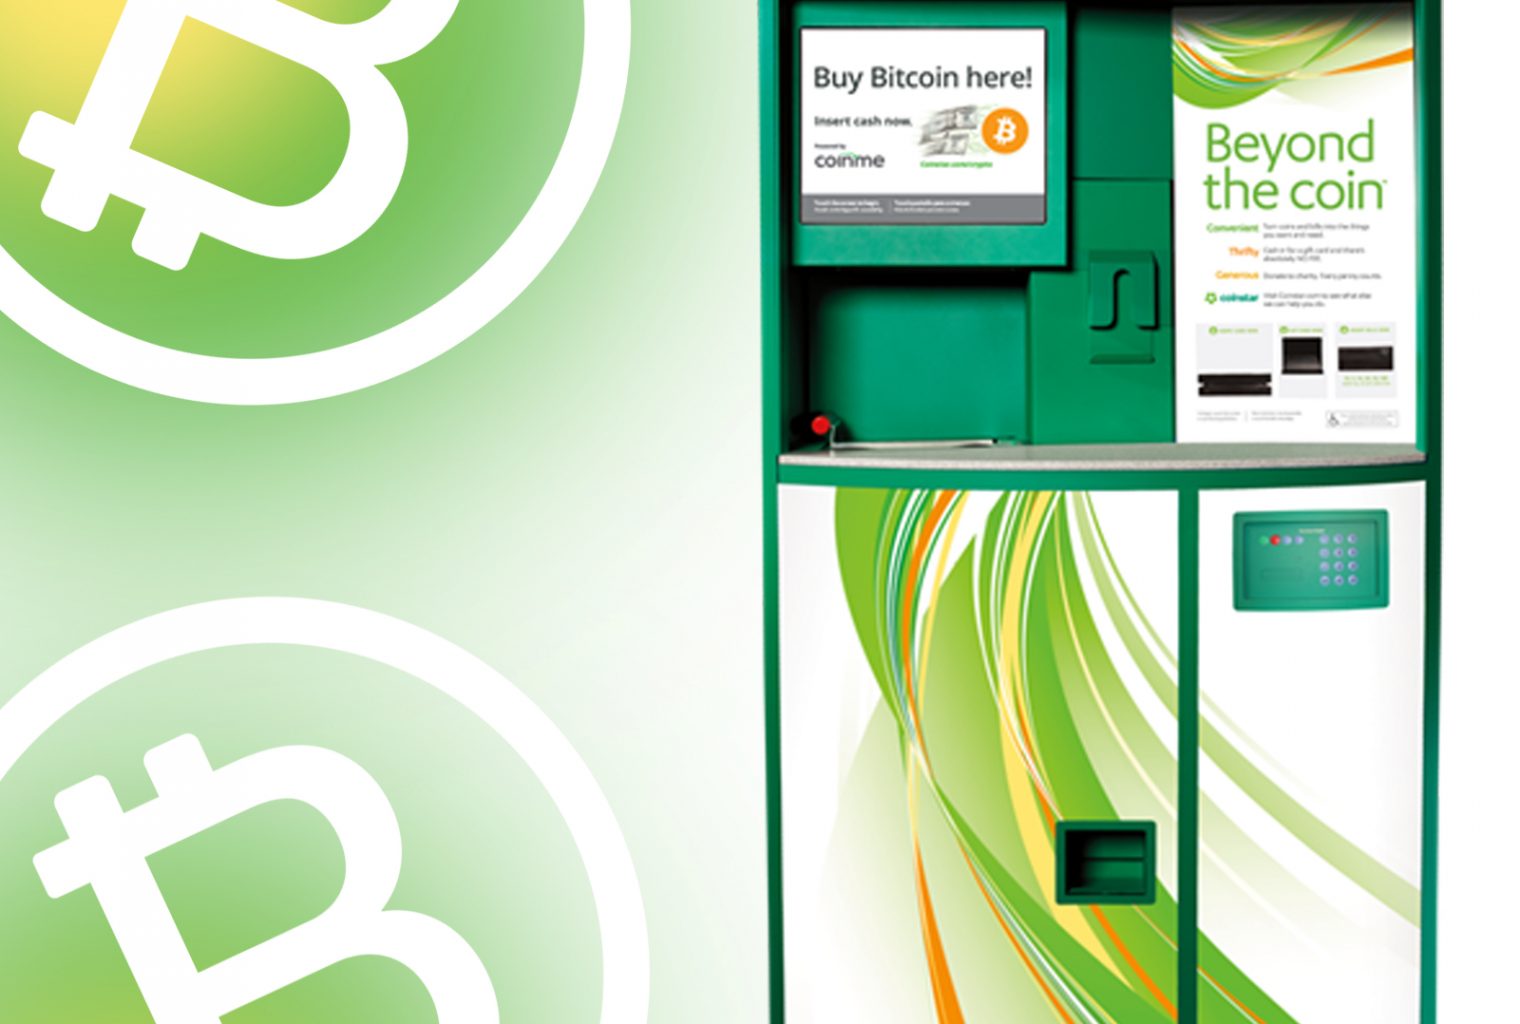 Coinstar Machines In Select Us States Now Sell Btc Vouchers - 